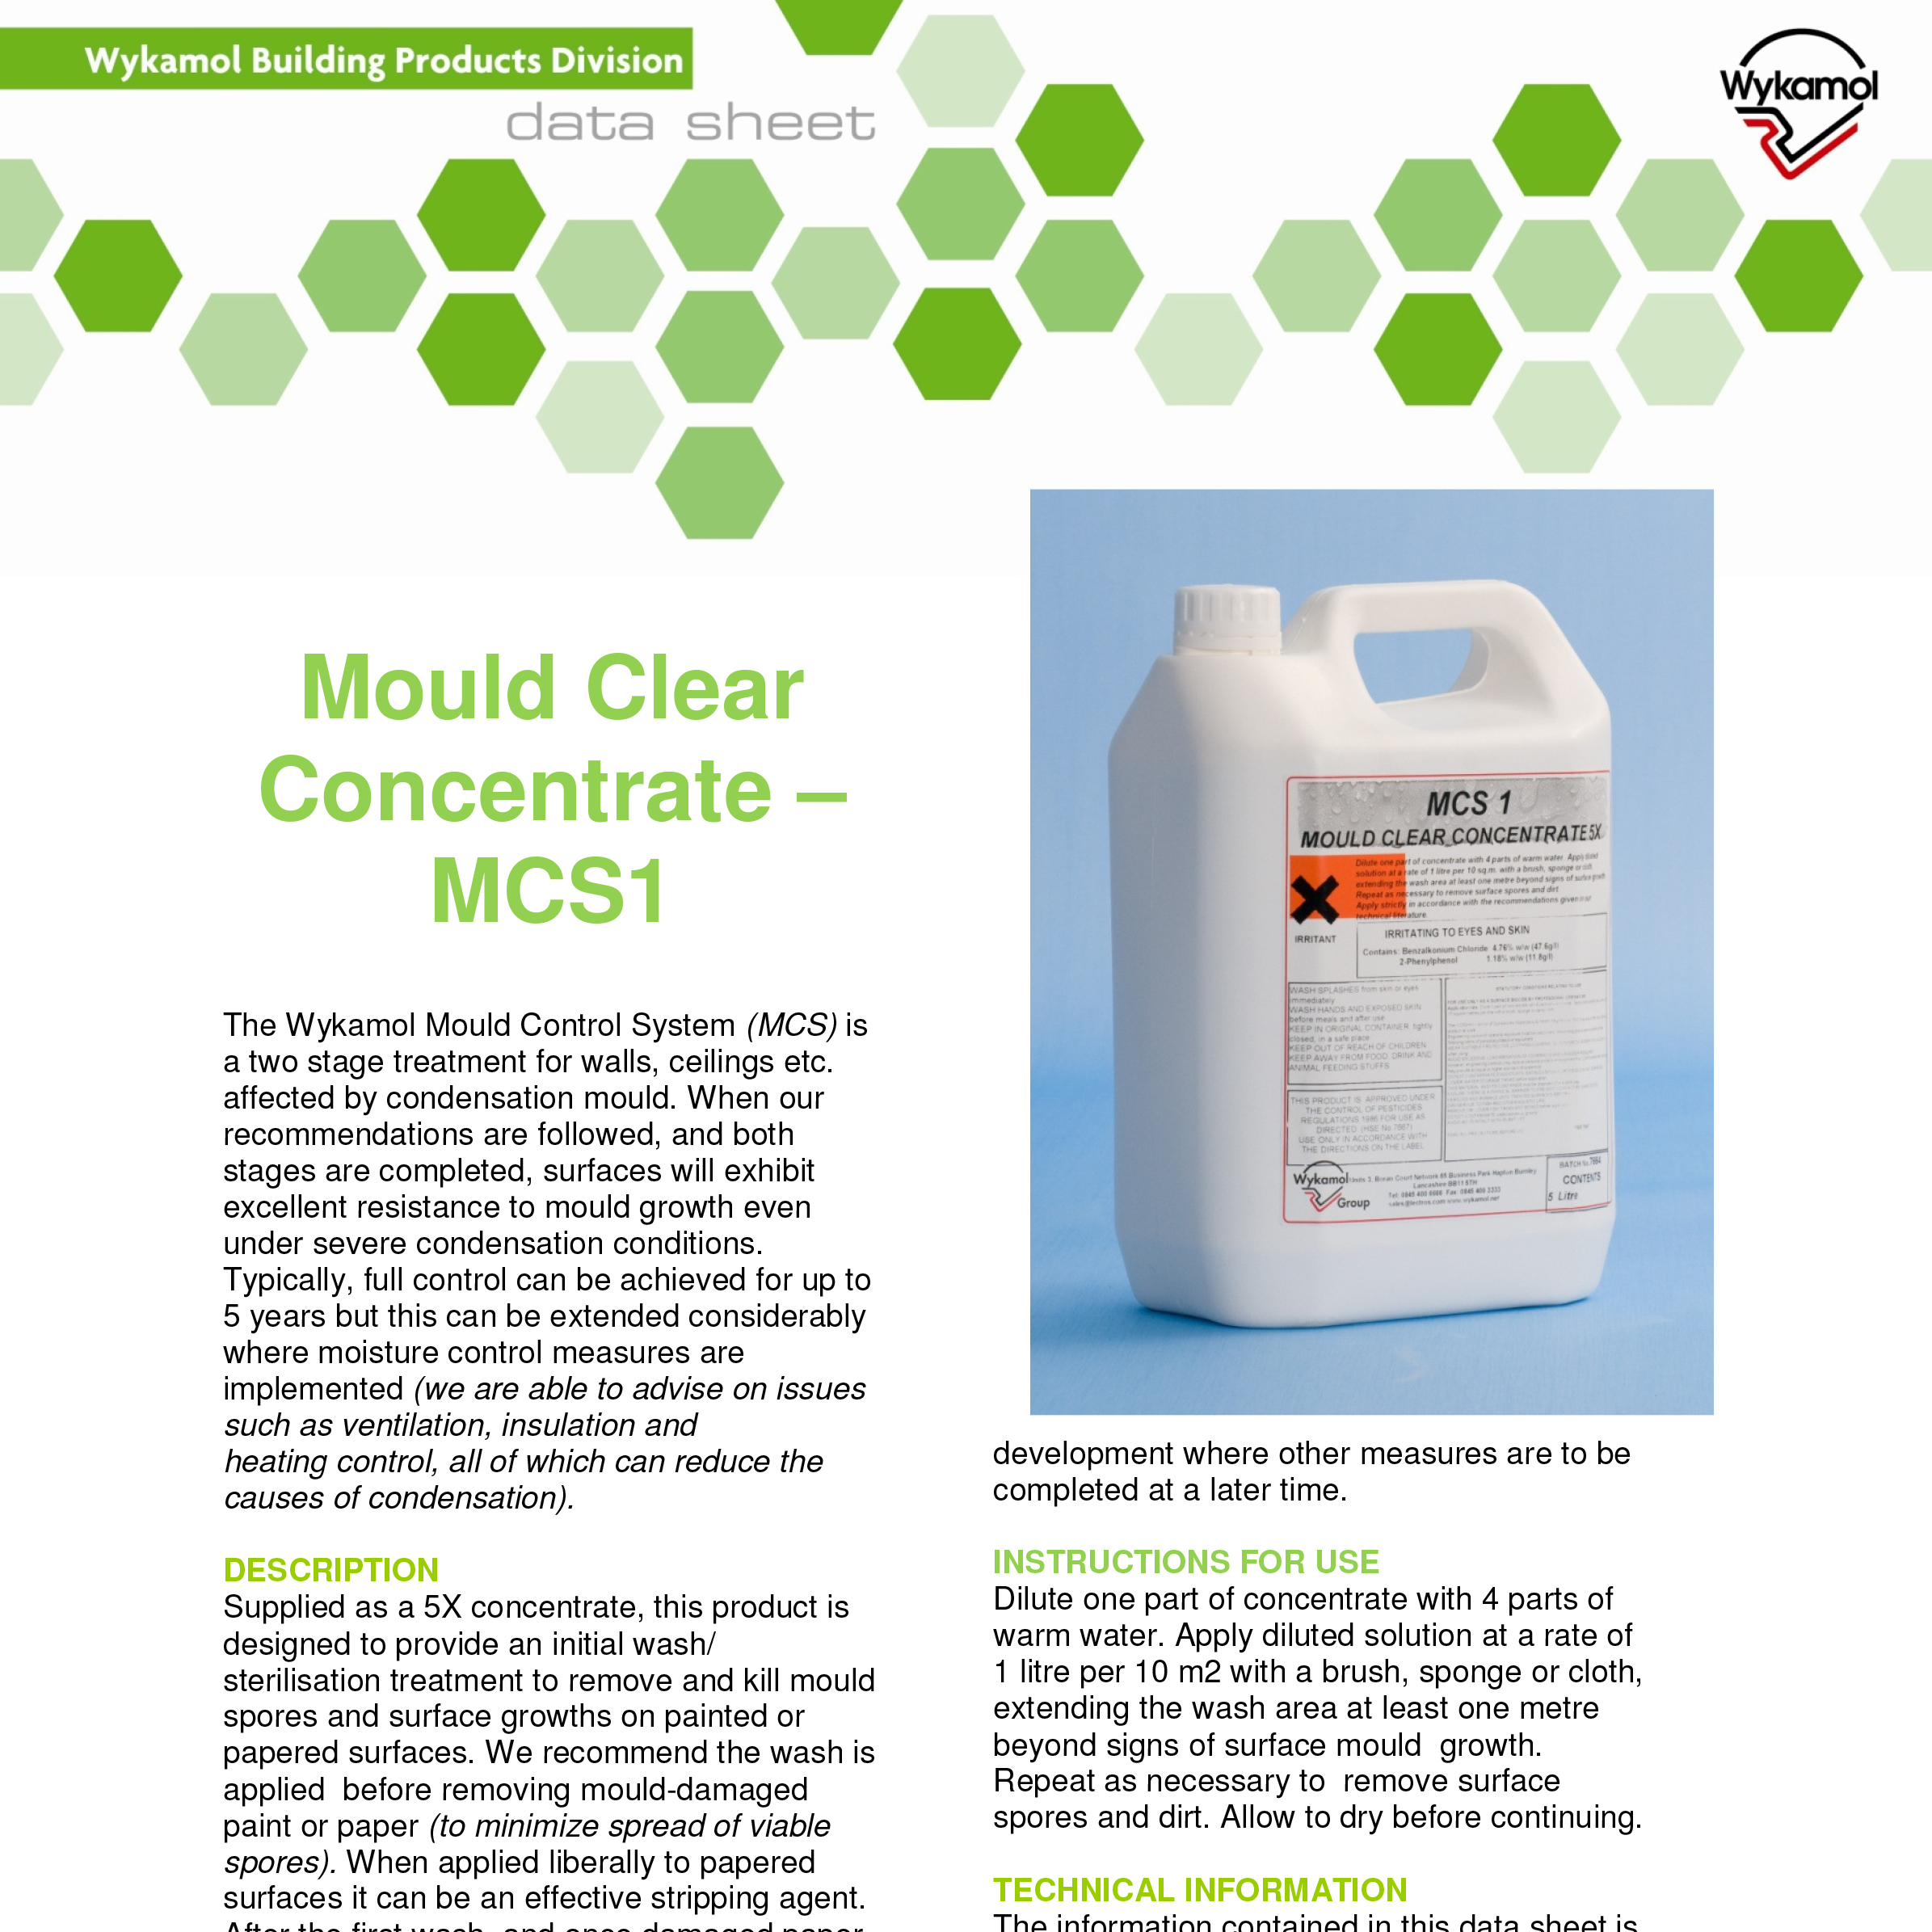 MCS 1 Mould Clear Concentrate Product Guide